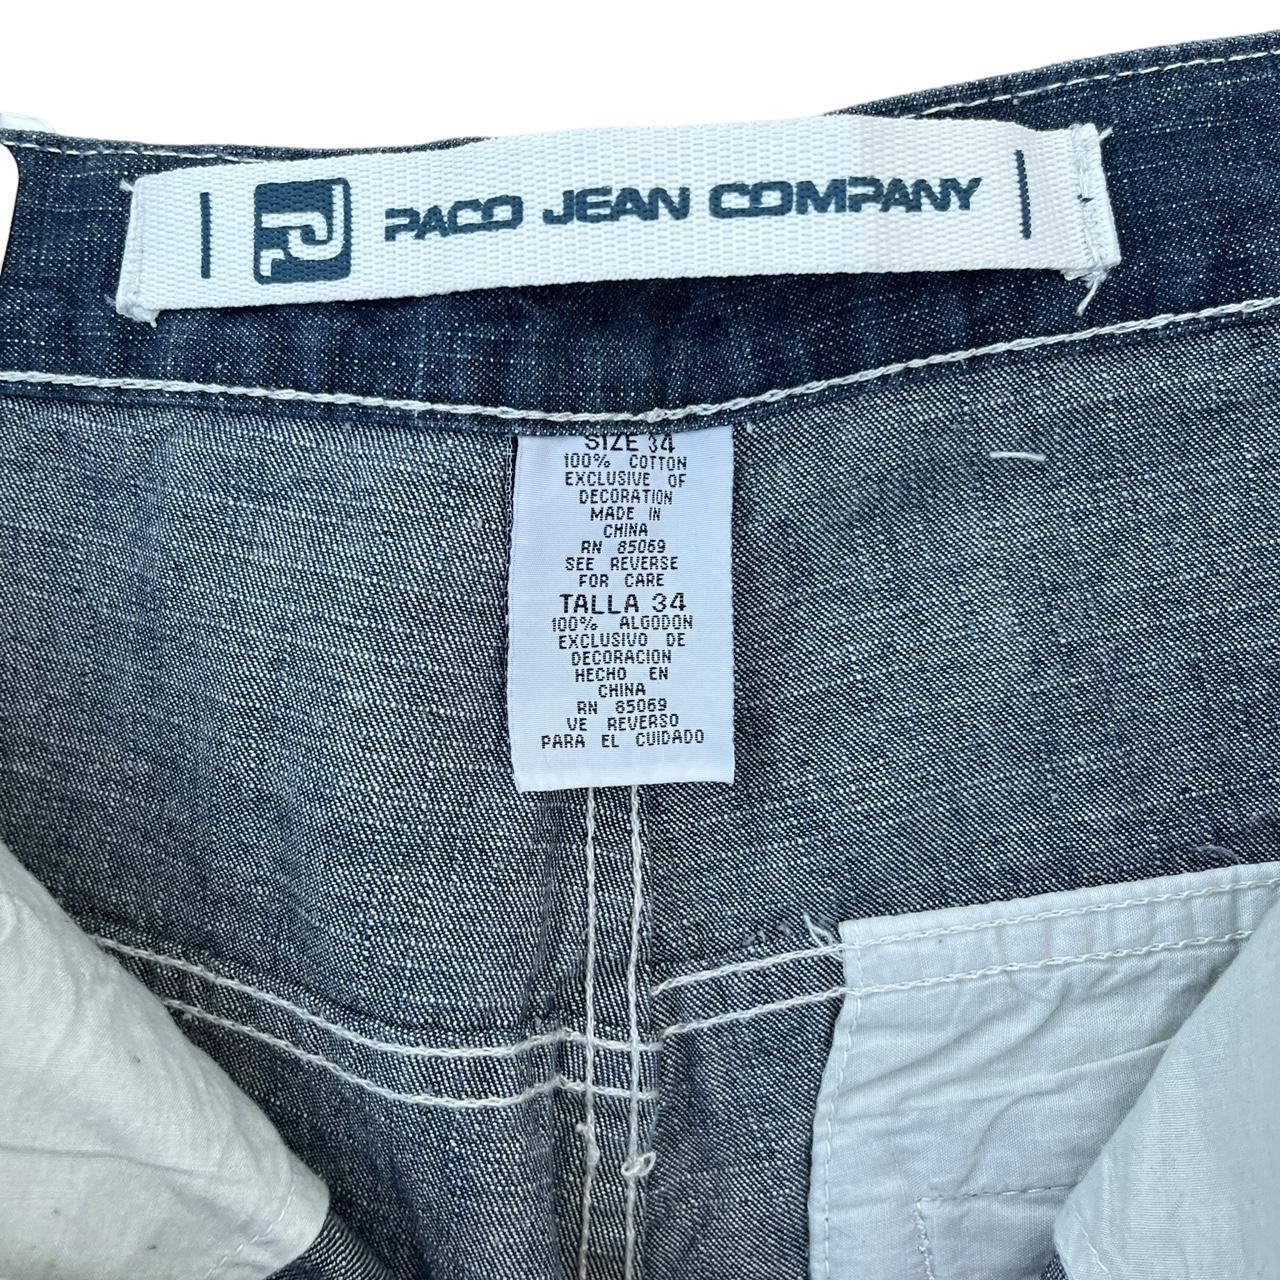 Vintage Paco Jeans Shorts New With Tags! 34